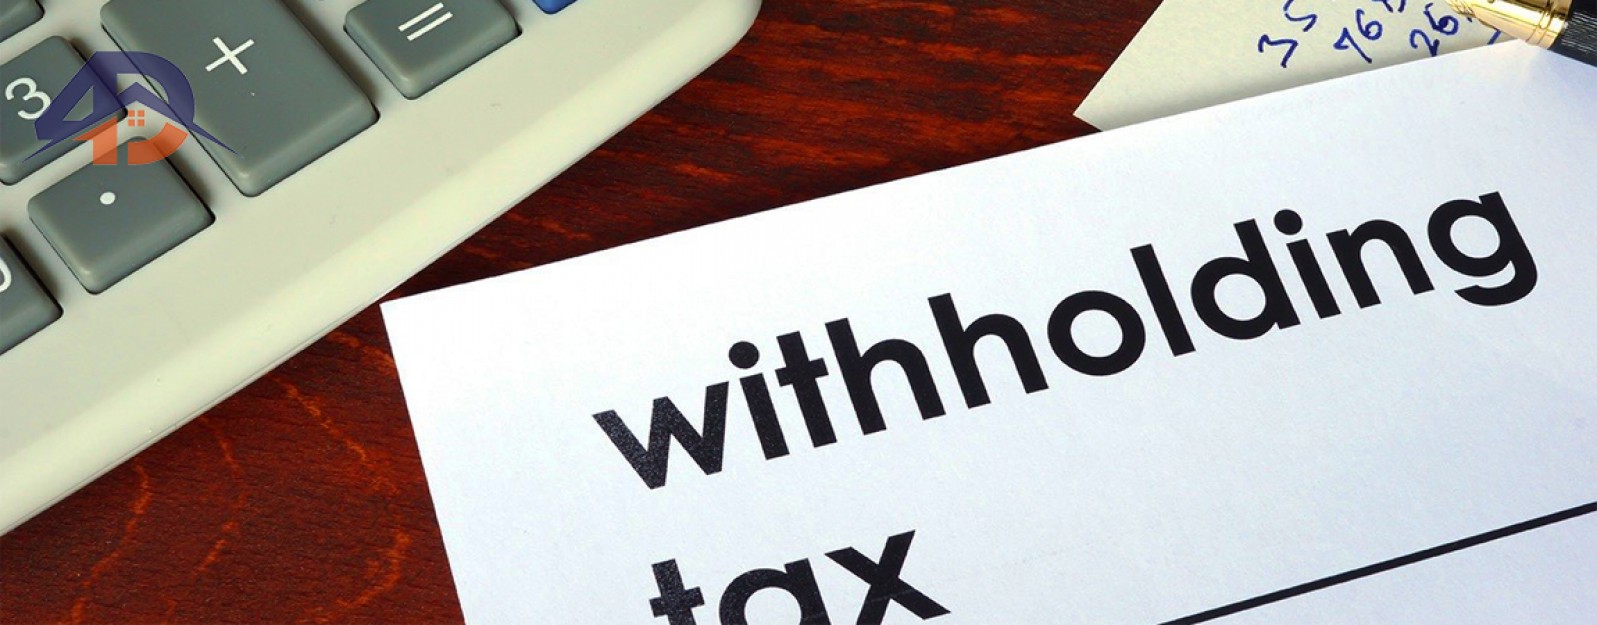 Withholding Tax on Property in Pakistan 2021-22